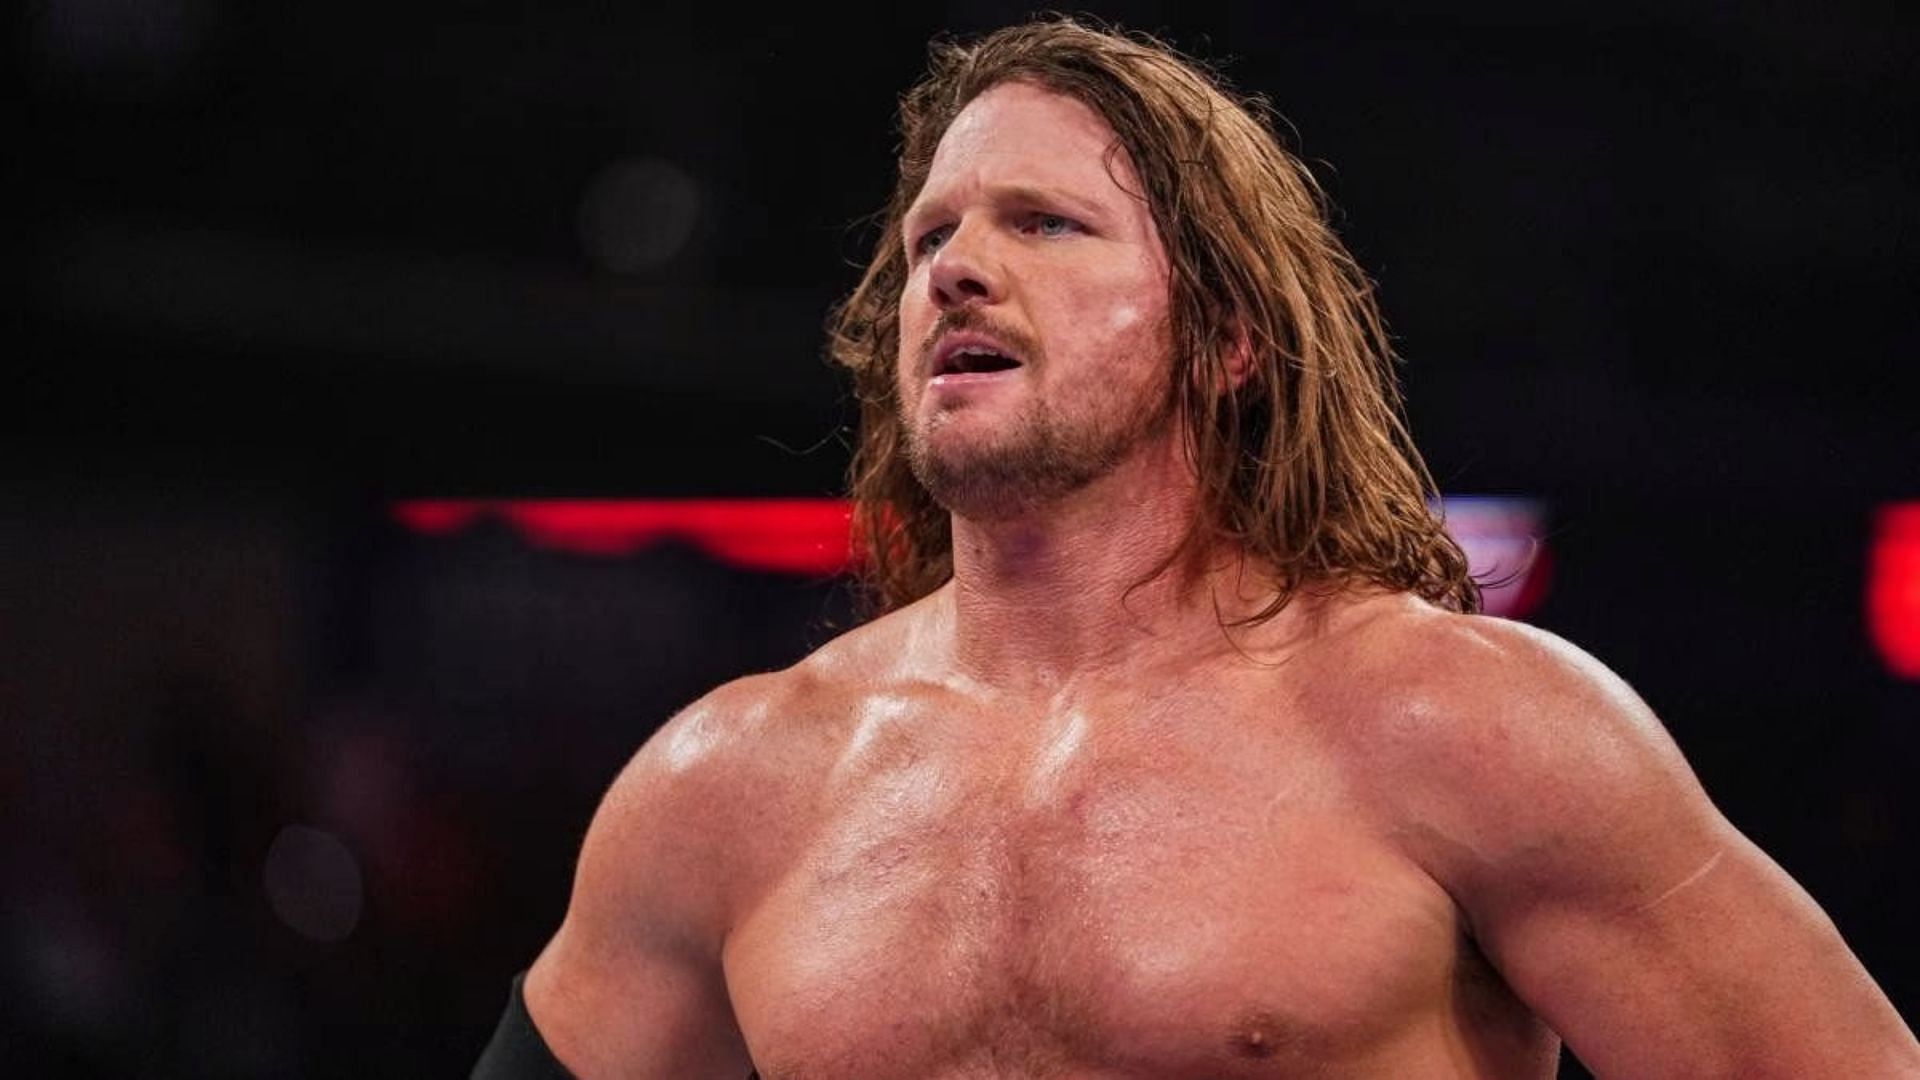 AJ Styles is a multiple time WWE Champion.